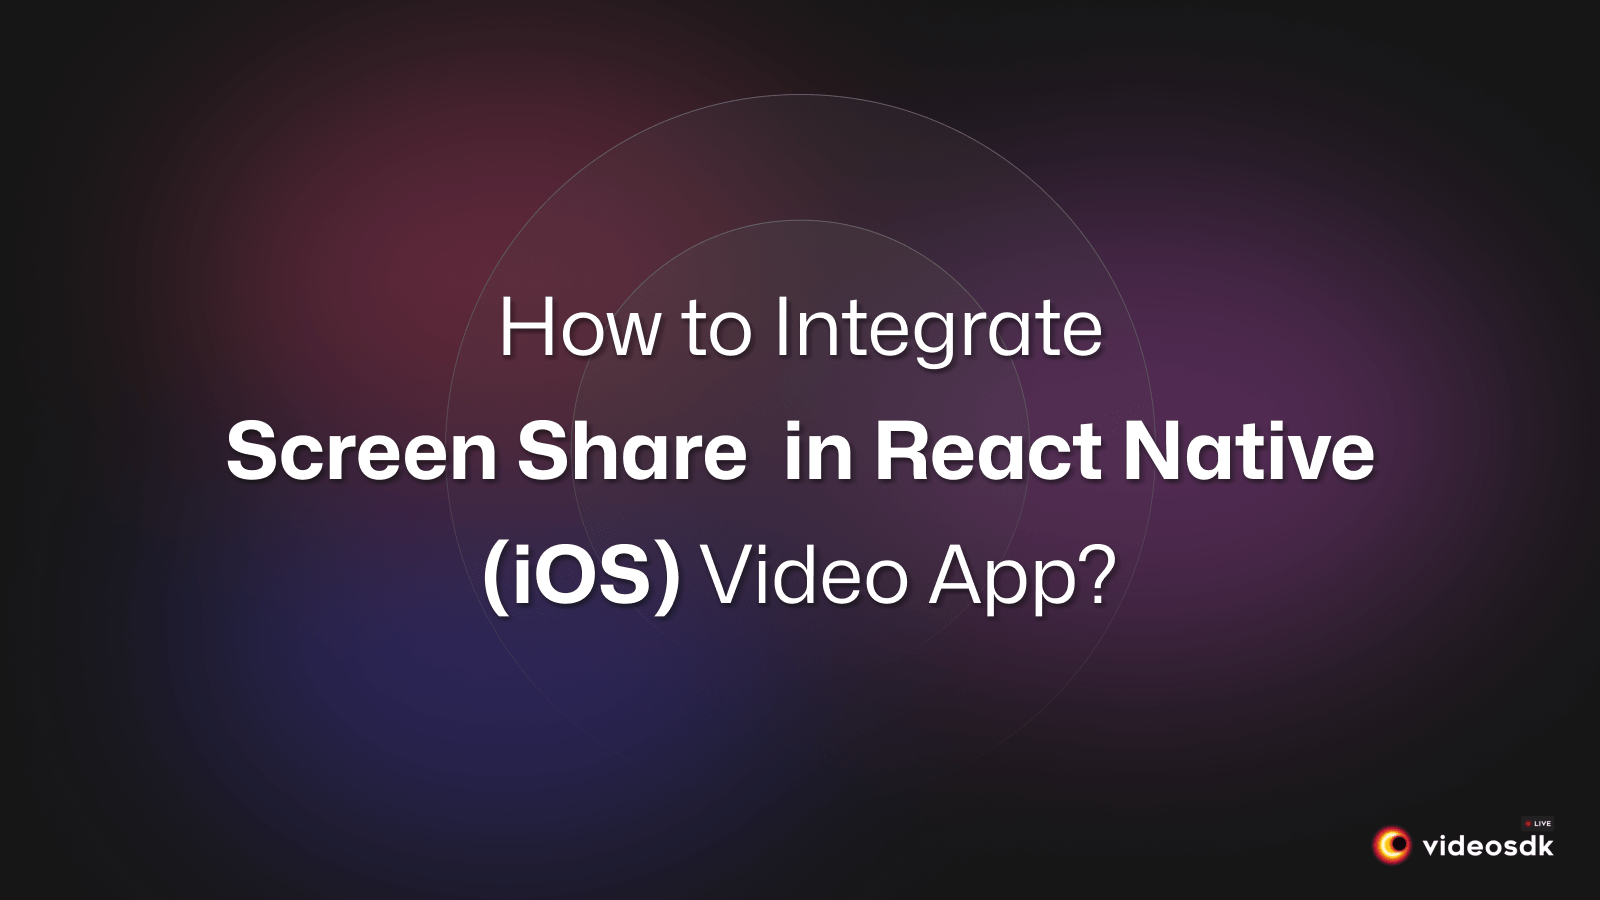 How to Integrate Screen Share in the React Native iOS Video Call App?